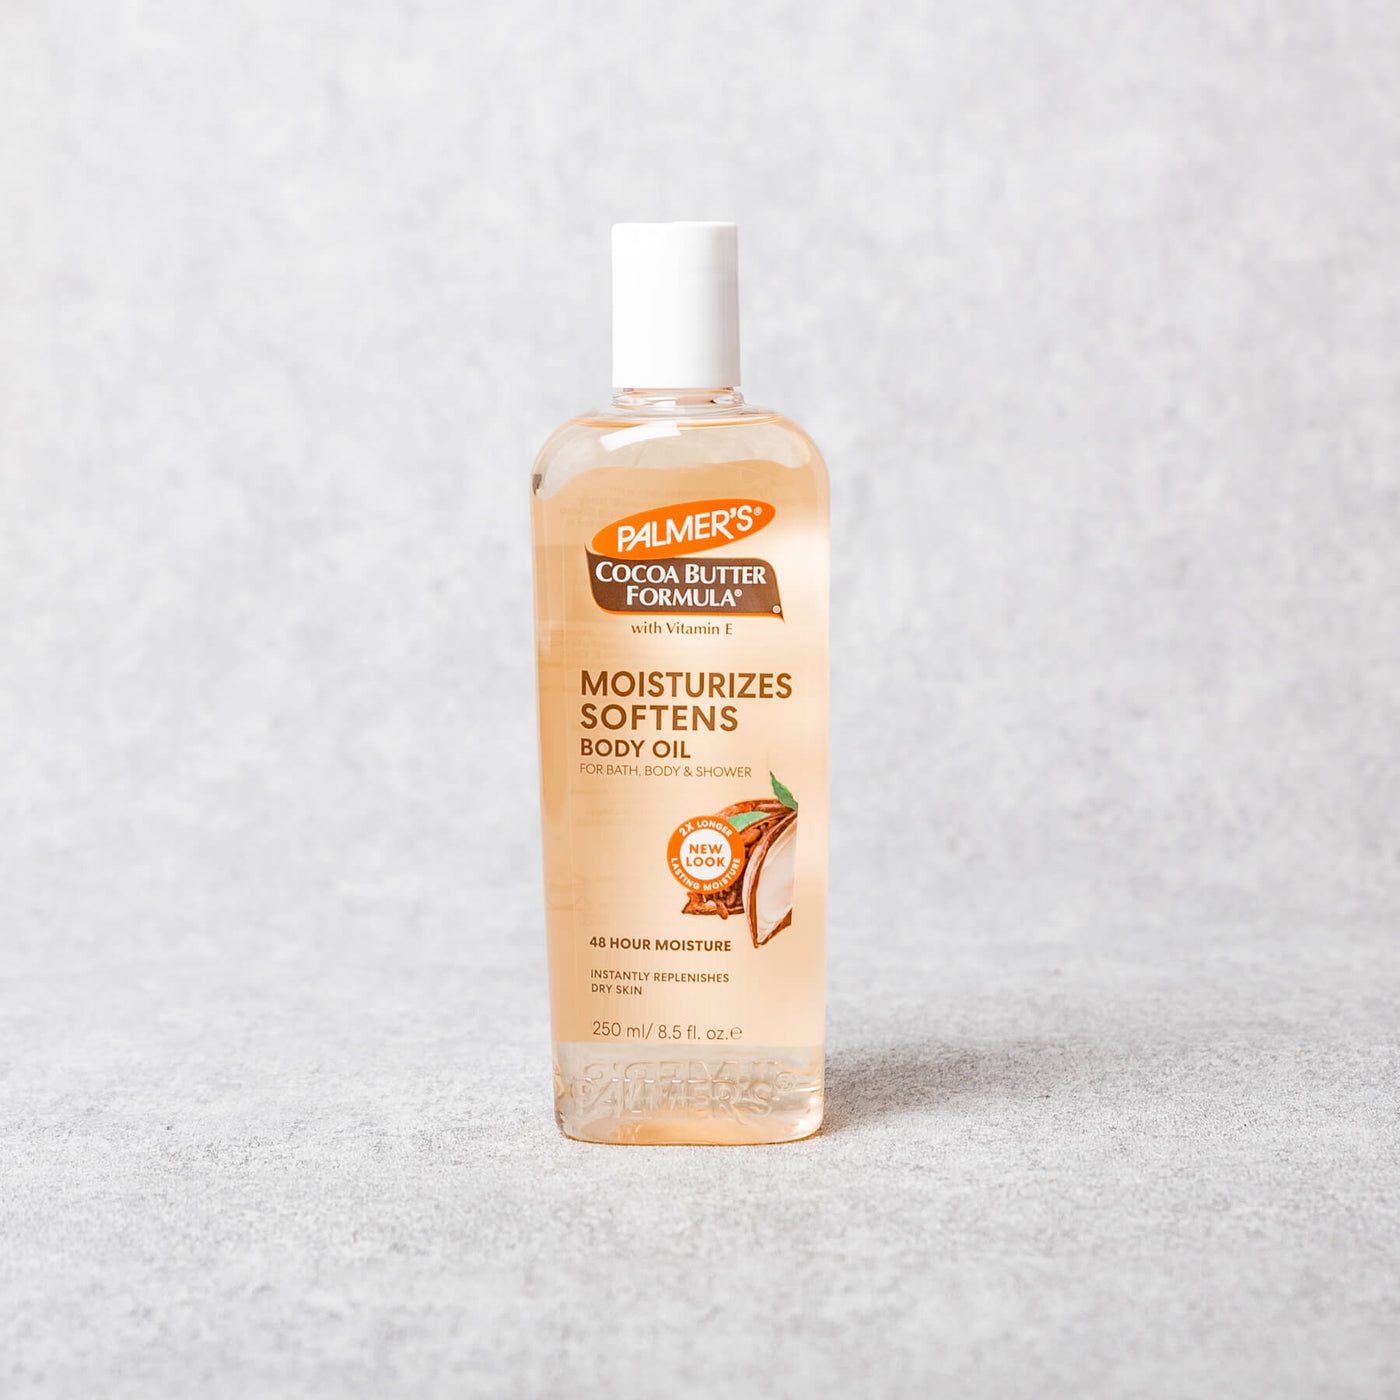 Palmers - Cocoa Butter Formula Moisturizes Softens Body Oil